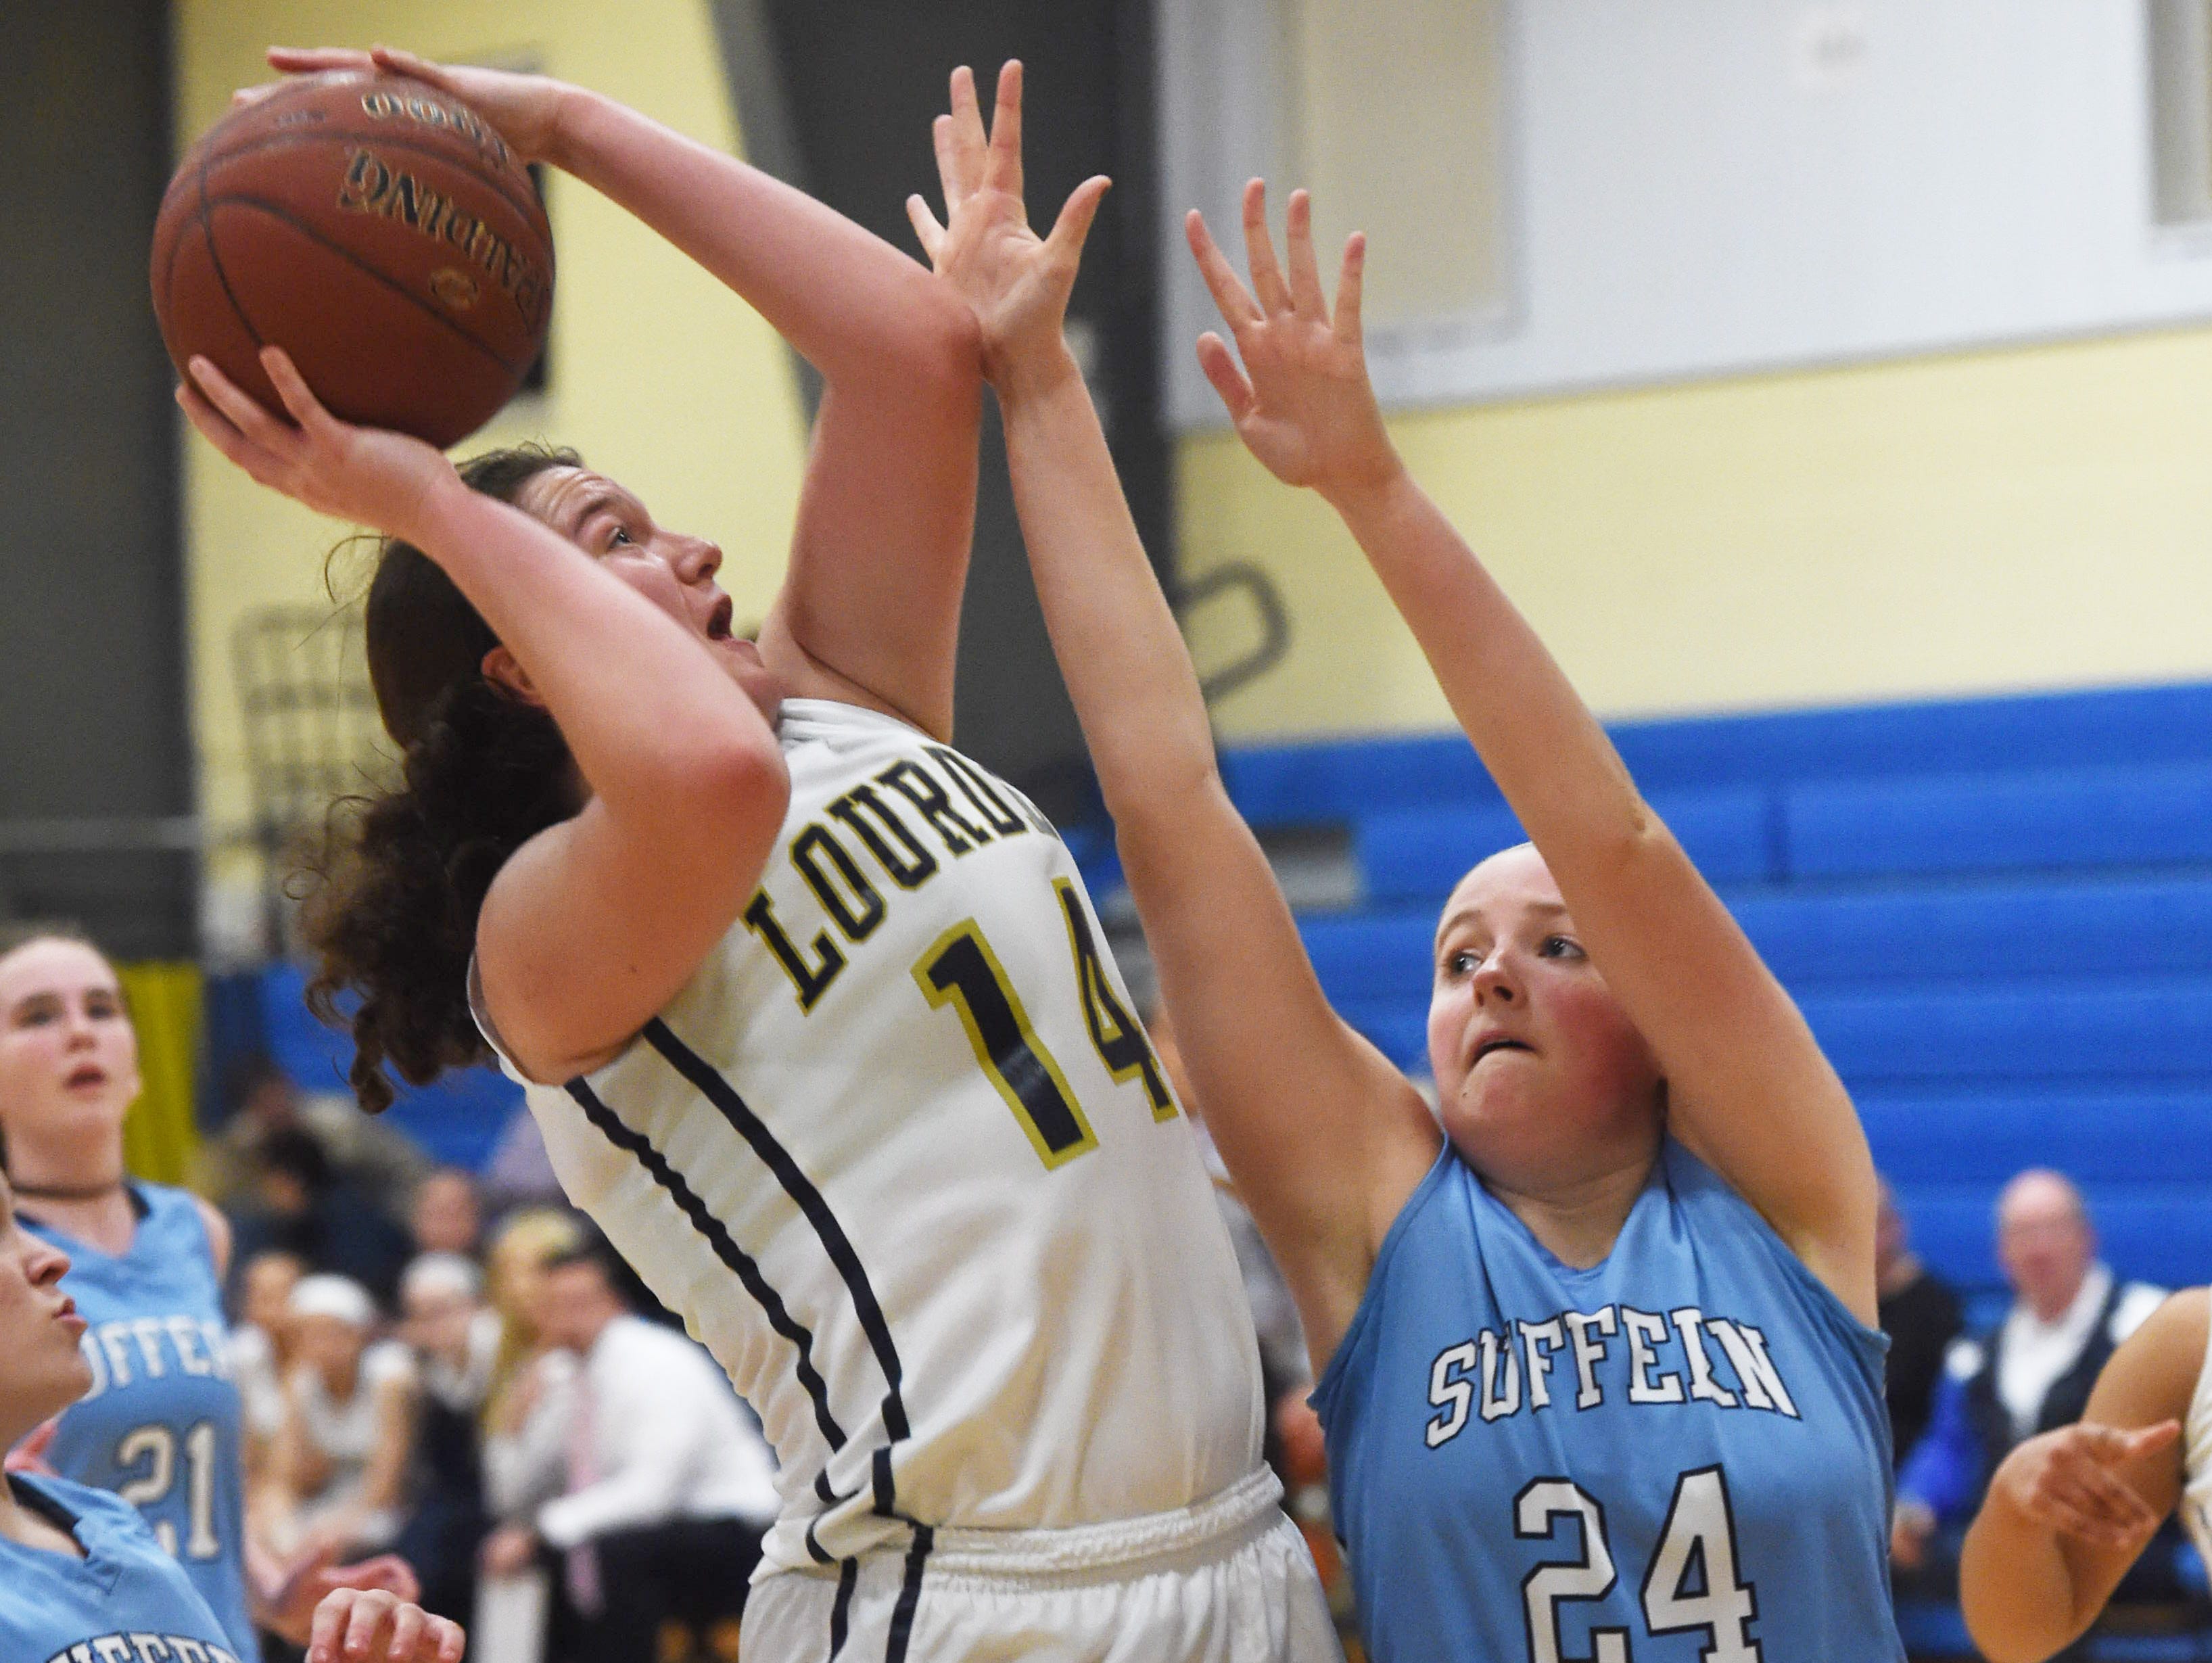 Lourdes' Abby Weeks, left, goes for a shot as Suffern's Caleigh Calhoon, right, defends during Friday's game.